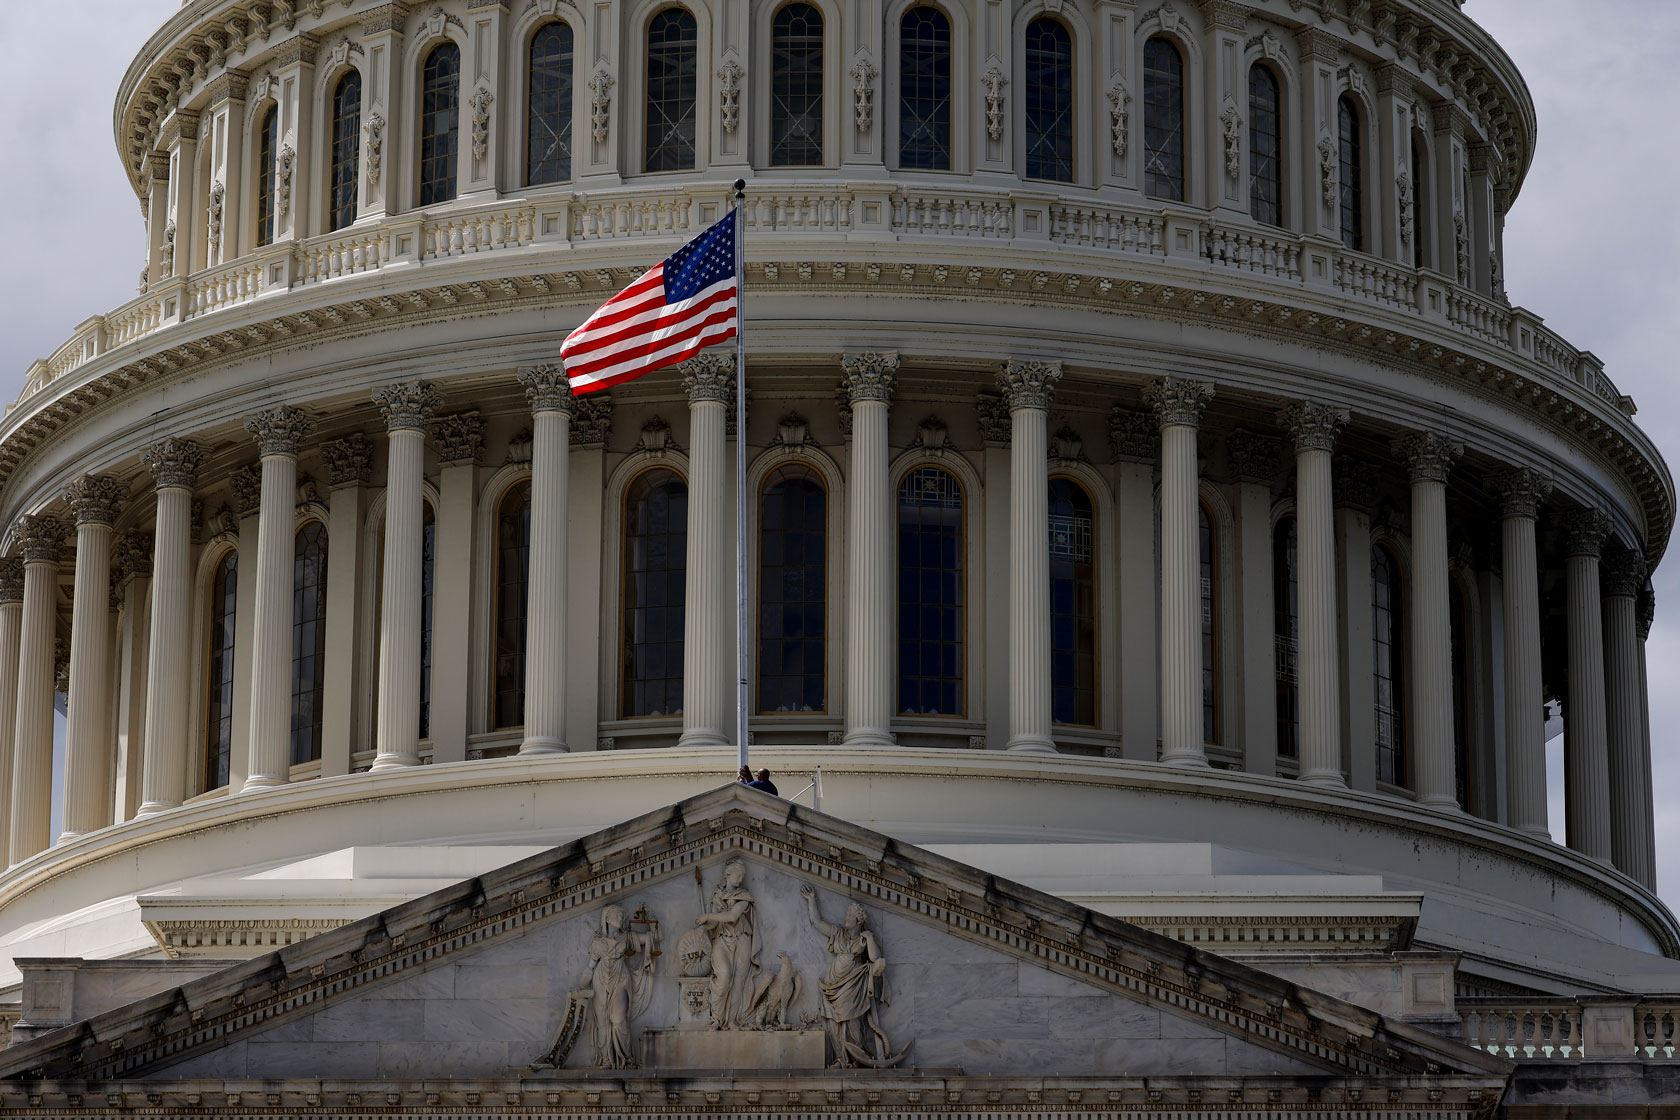 Photo shows a close-up view of the U.S. Capitol building with the American flag in the foreground.